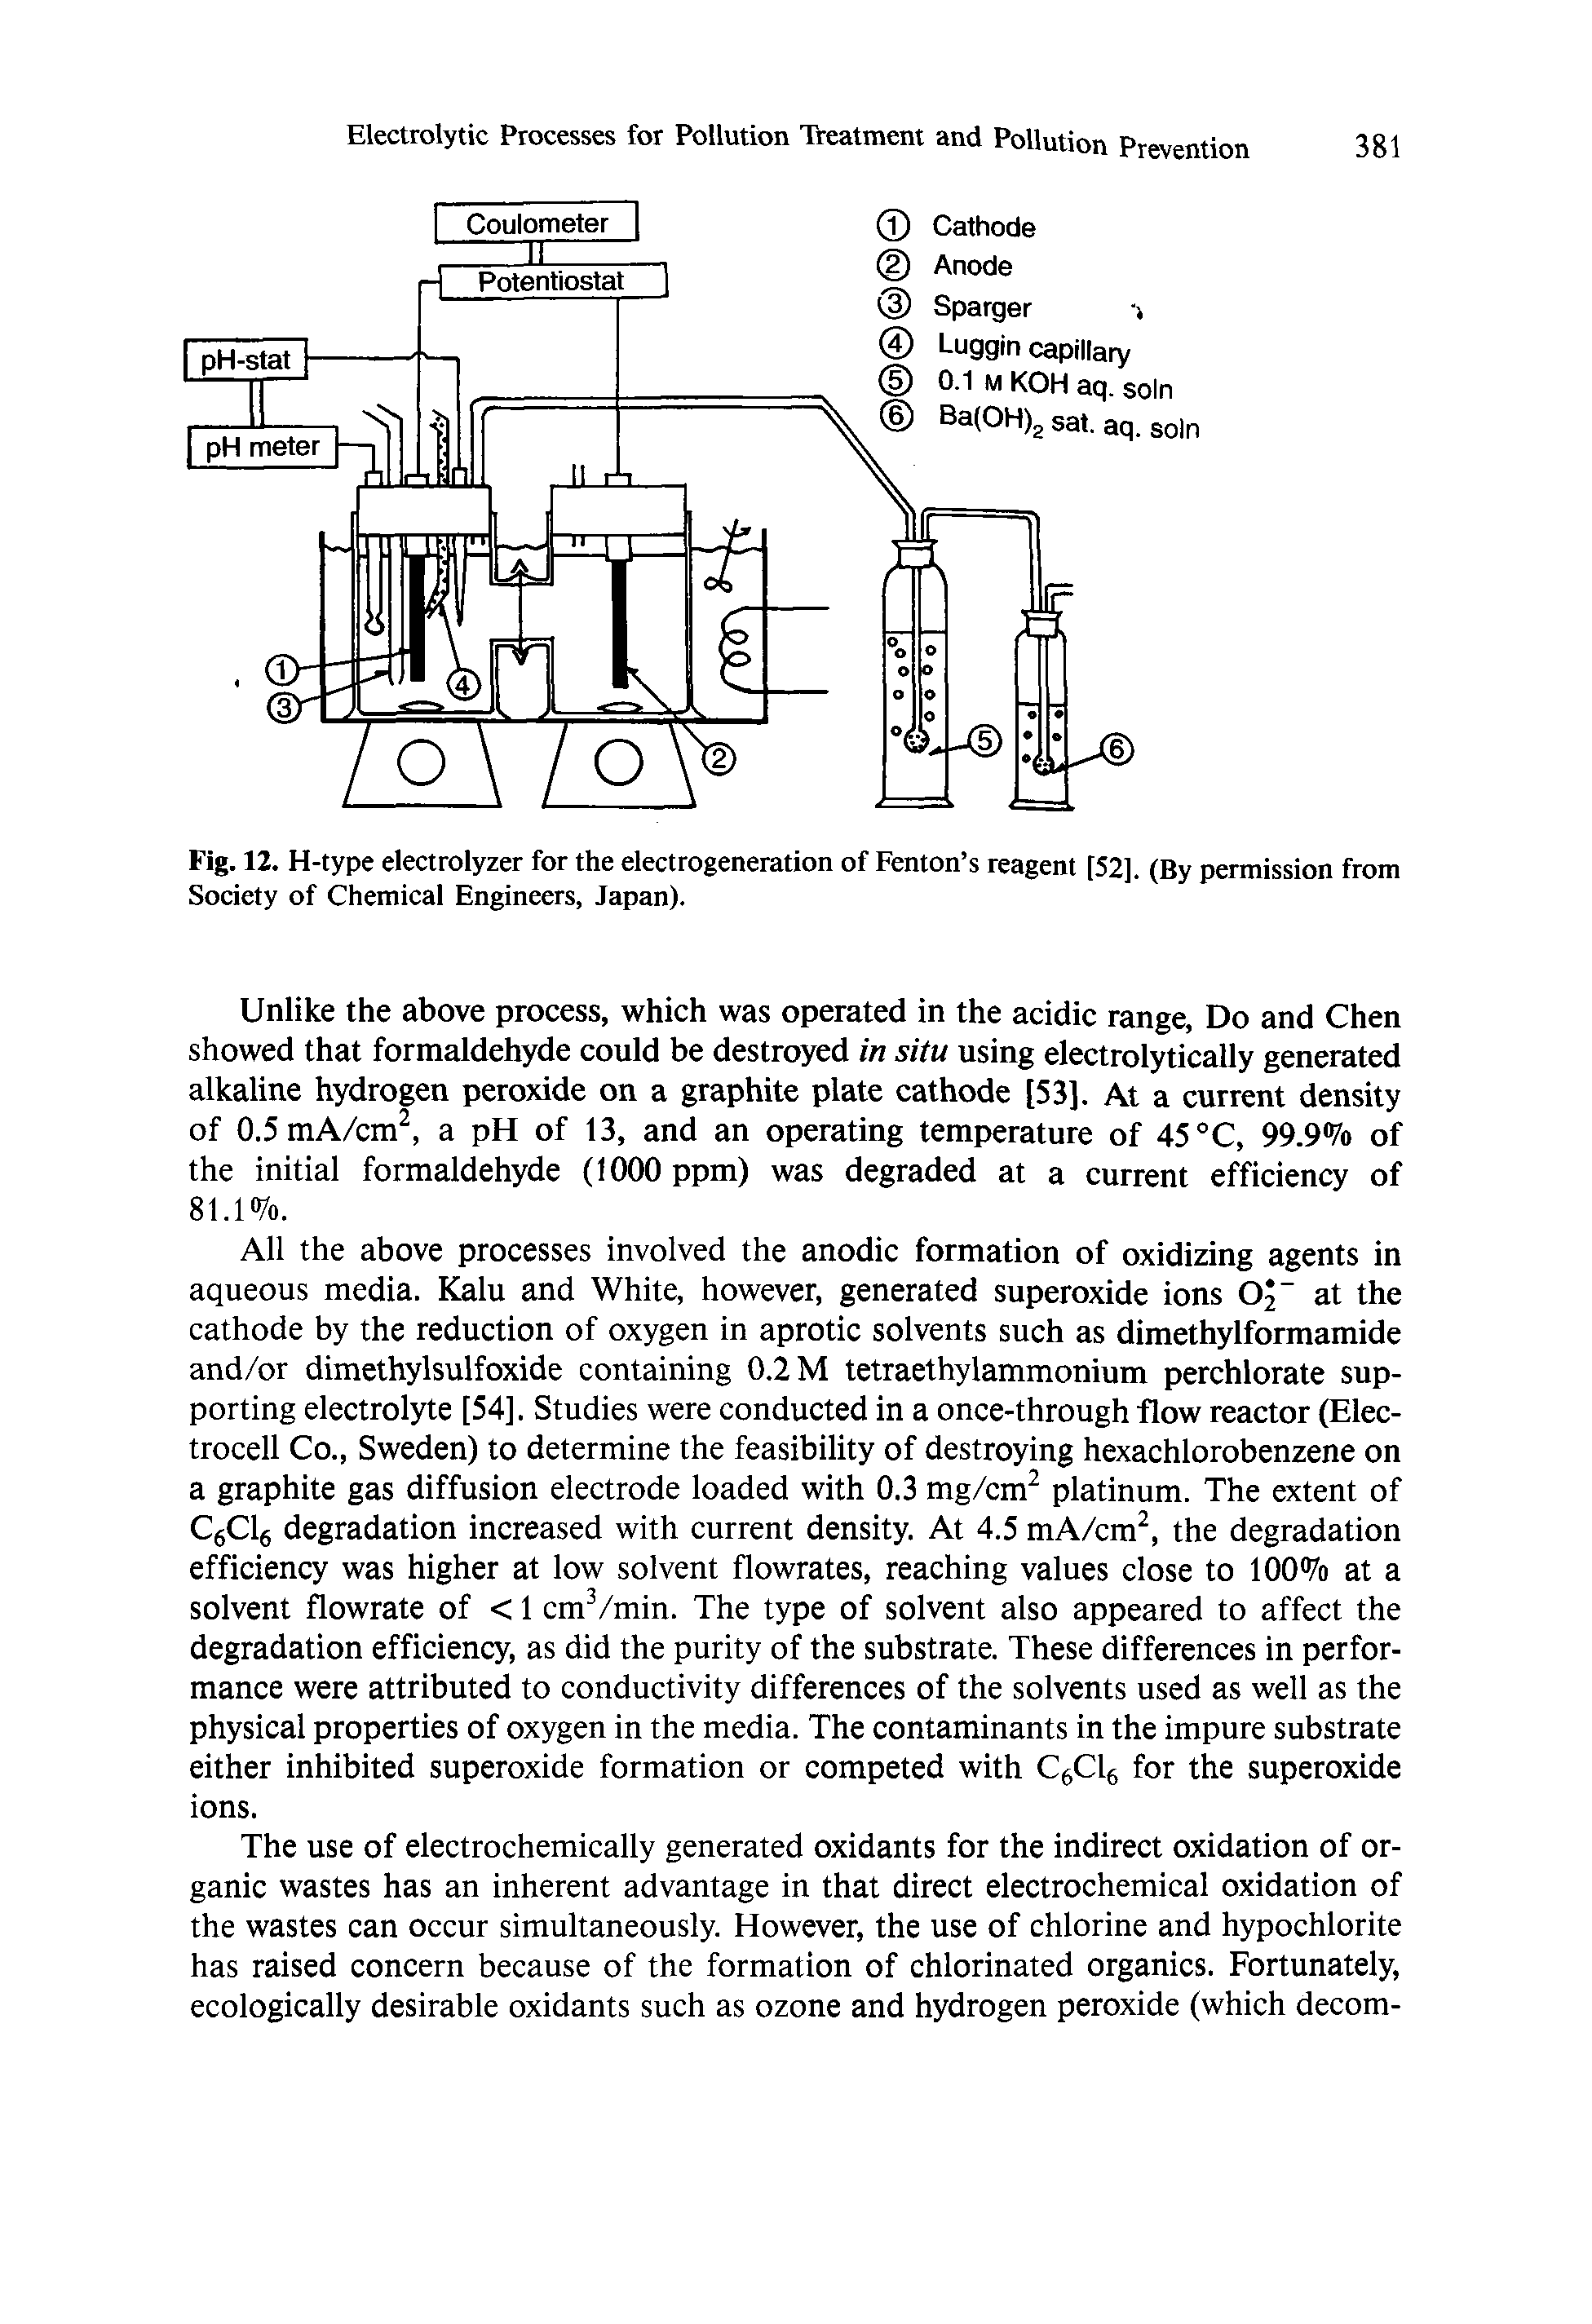 Fig. 12. H-type electrolyzer for the electrogeneration of Fenton s reagent [52], (By permission from Society of Chemical Engineers, Japan).